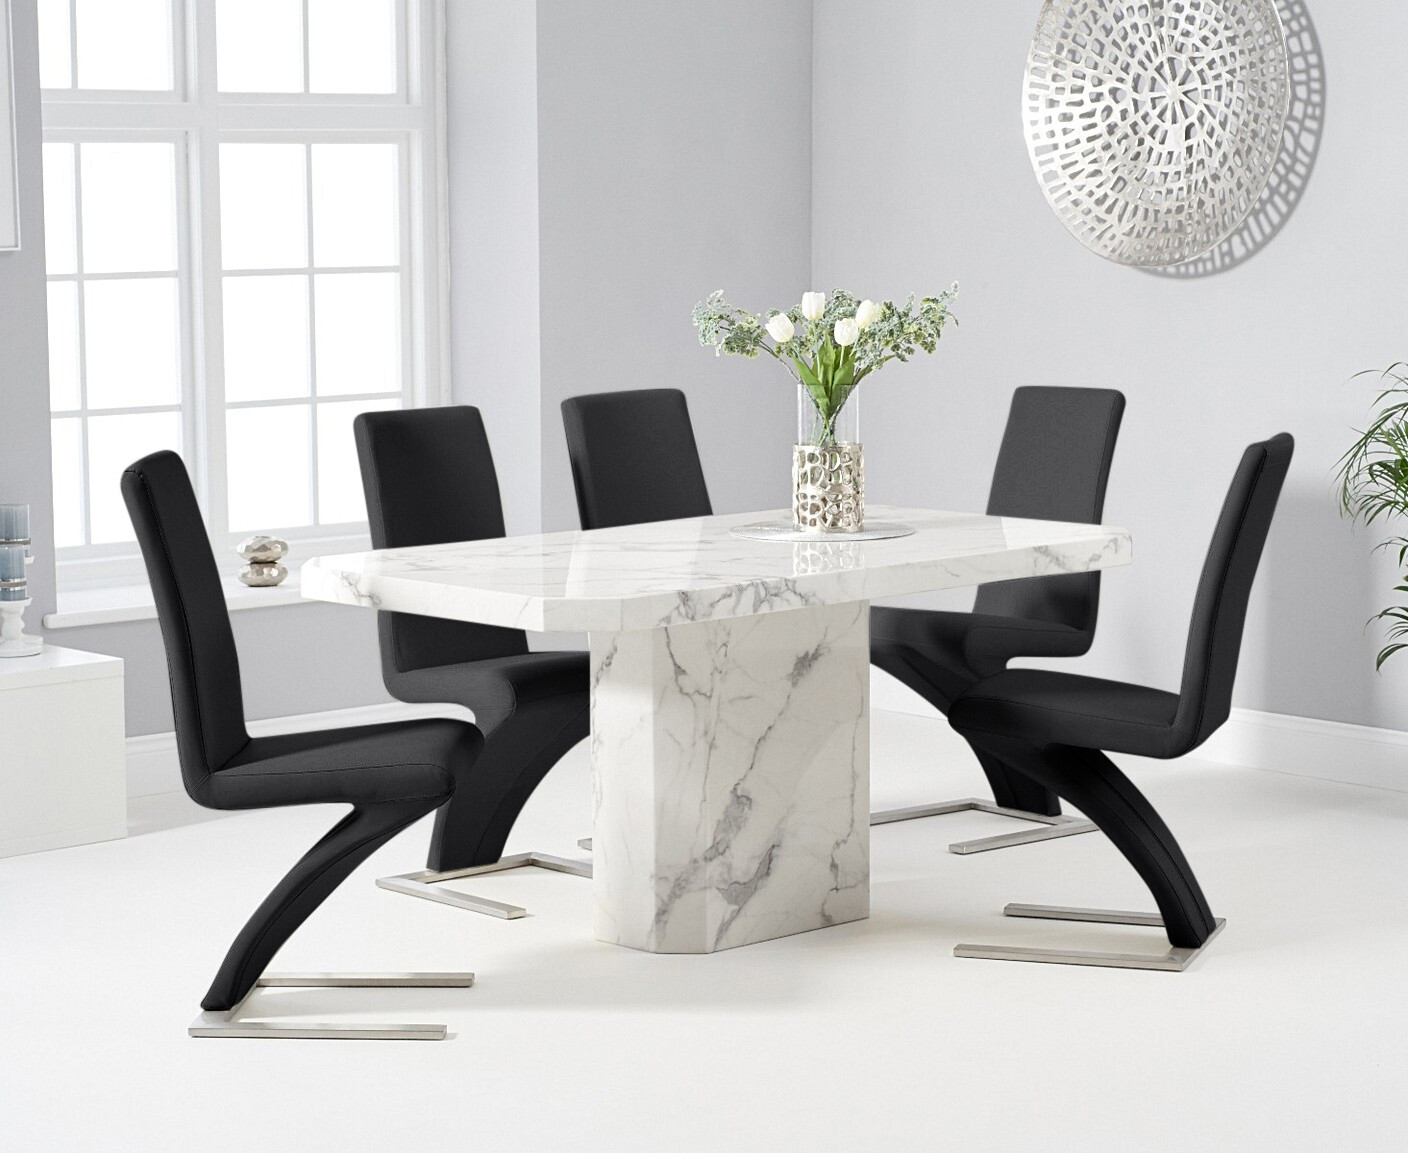 Belle 160cm White Marble Dining Table With 6 Black Aldo Chairs